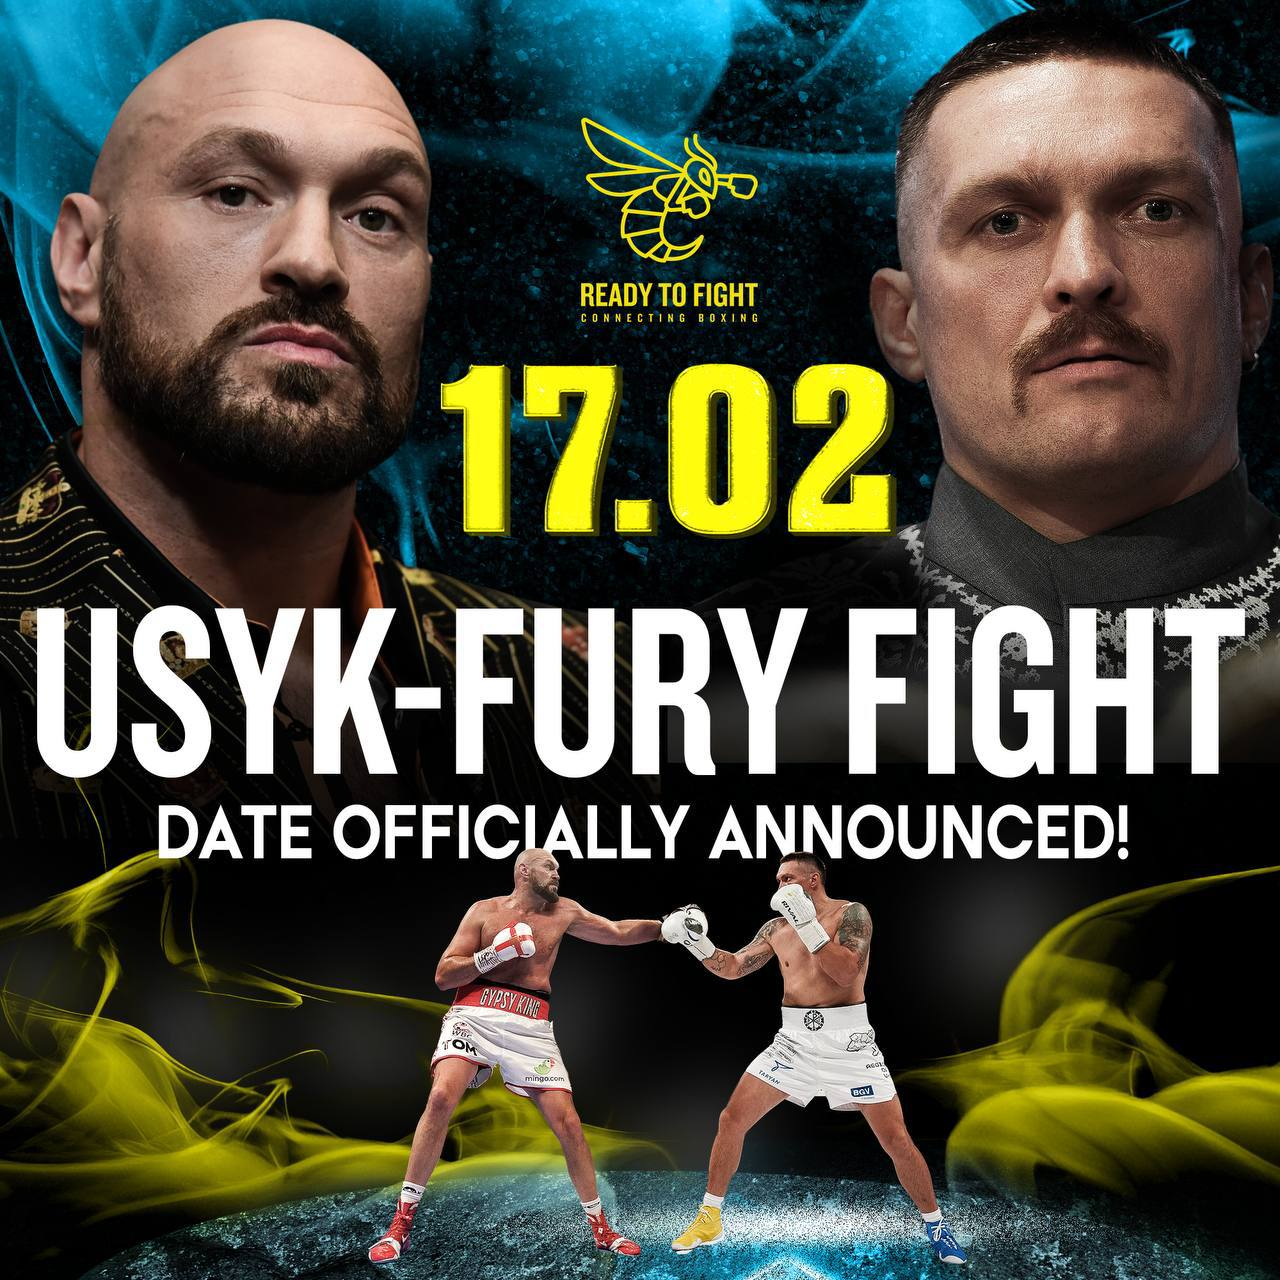 Usyk suddenly leaves the training camp before his fight with Fury